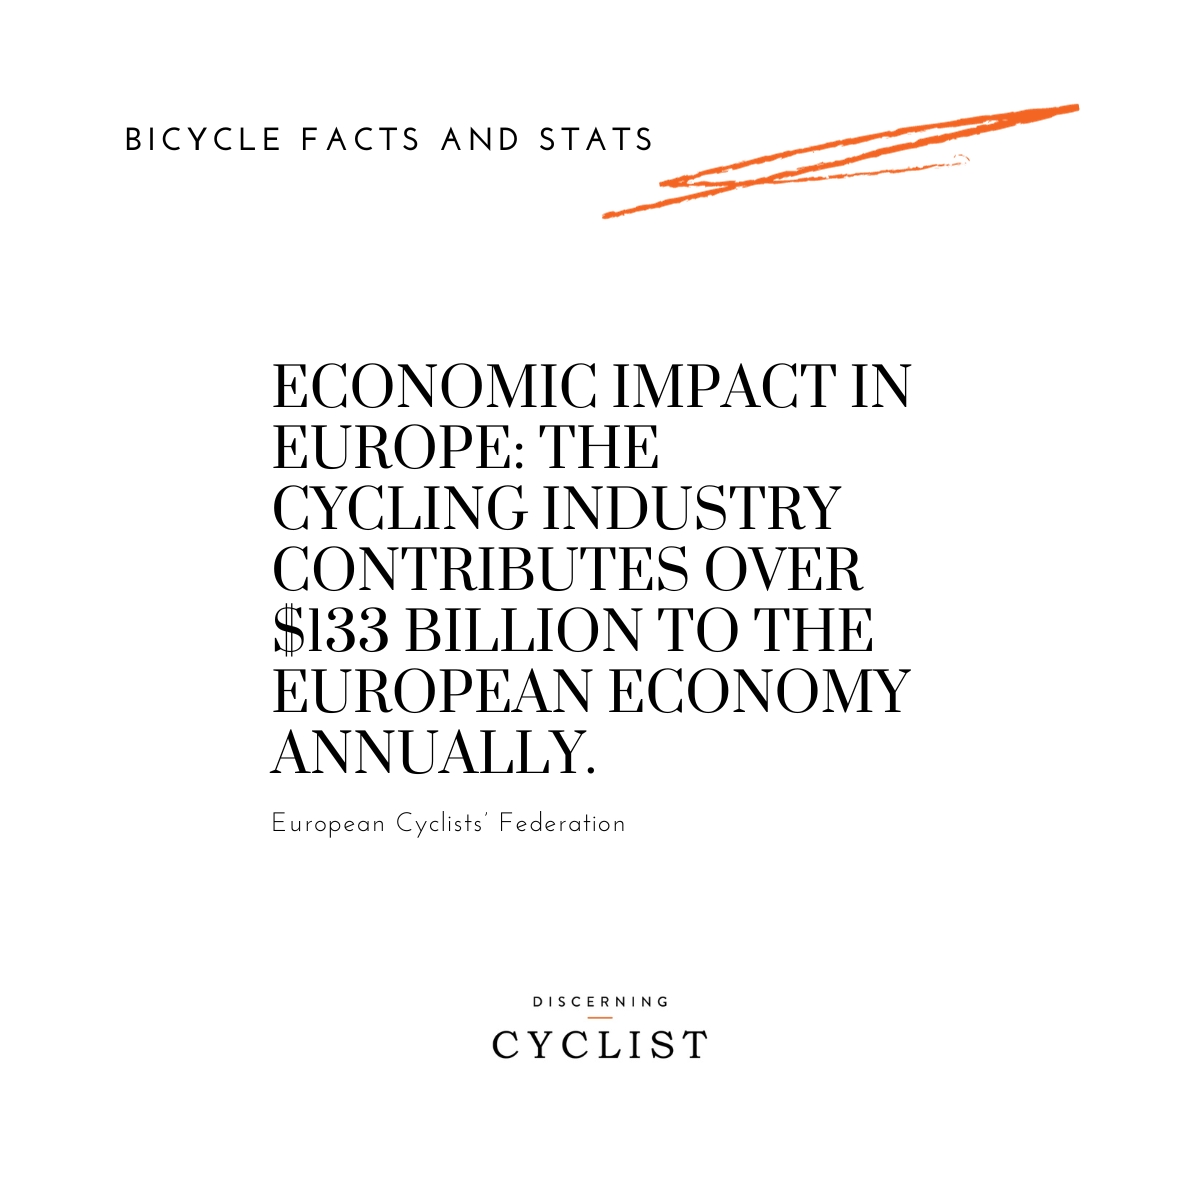 Economic Impact in Europe: The cycling industry contributes over $133 billion to the European economy annually.